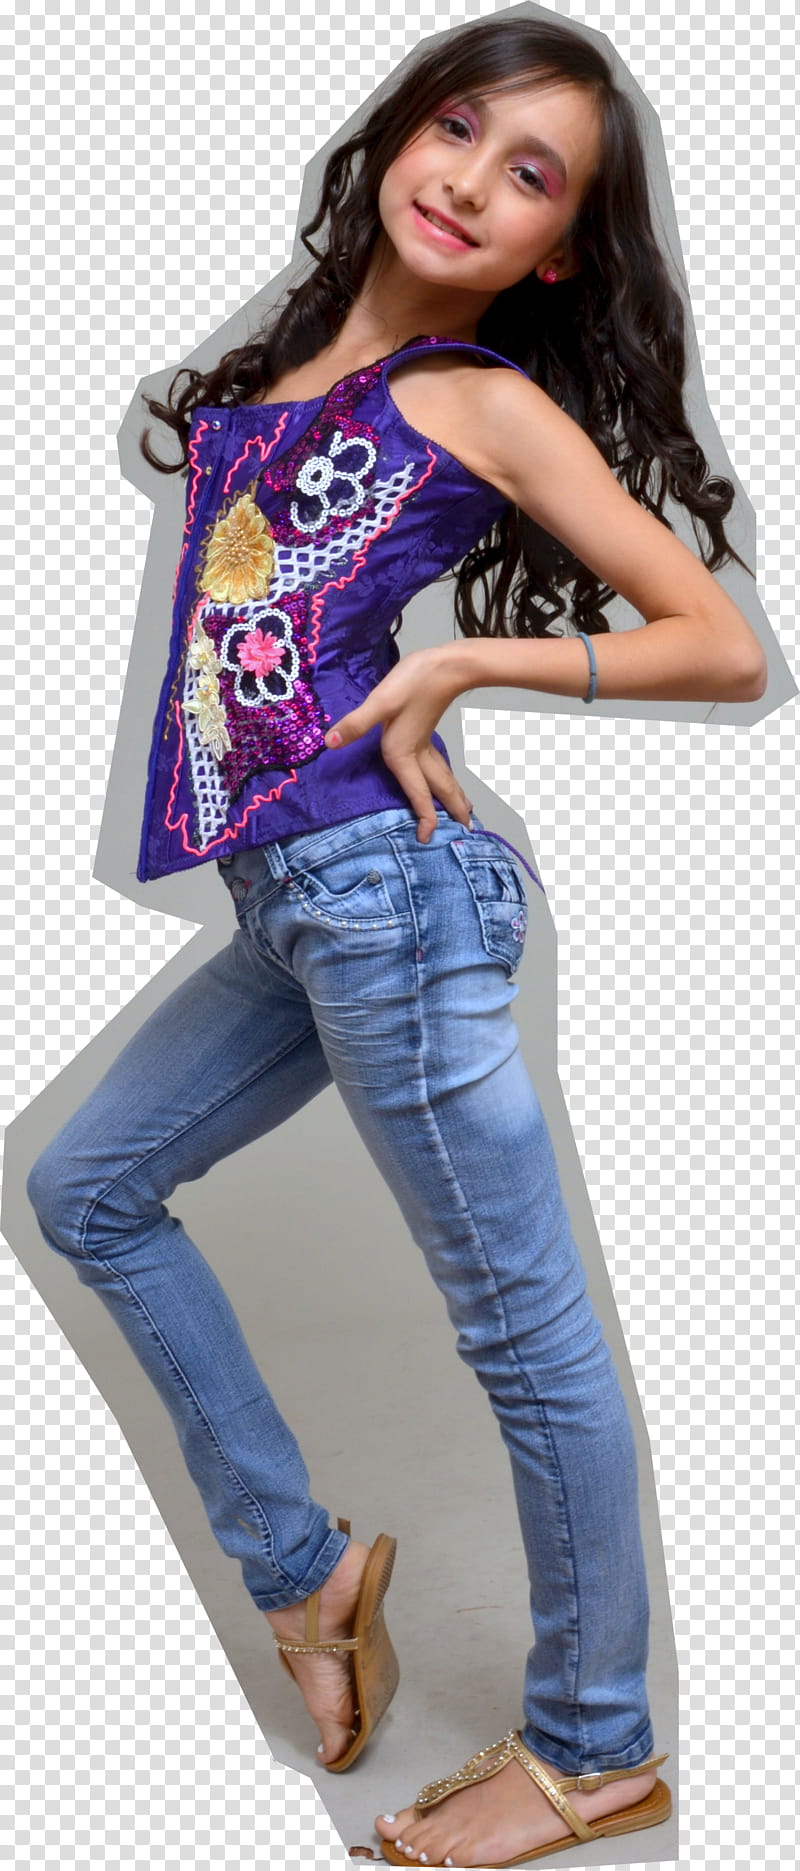 Gretchen, standing girl wearing purple shirt and blue jeans transparent background PNG clipart